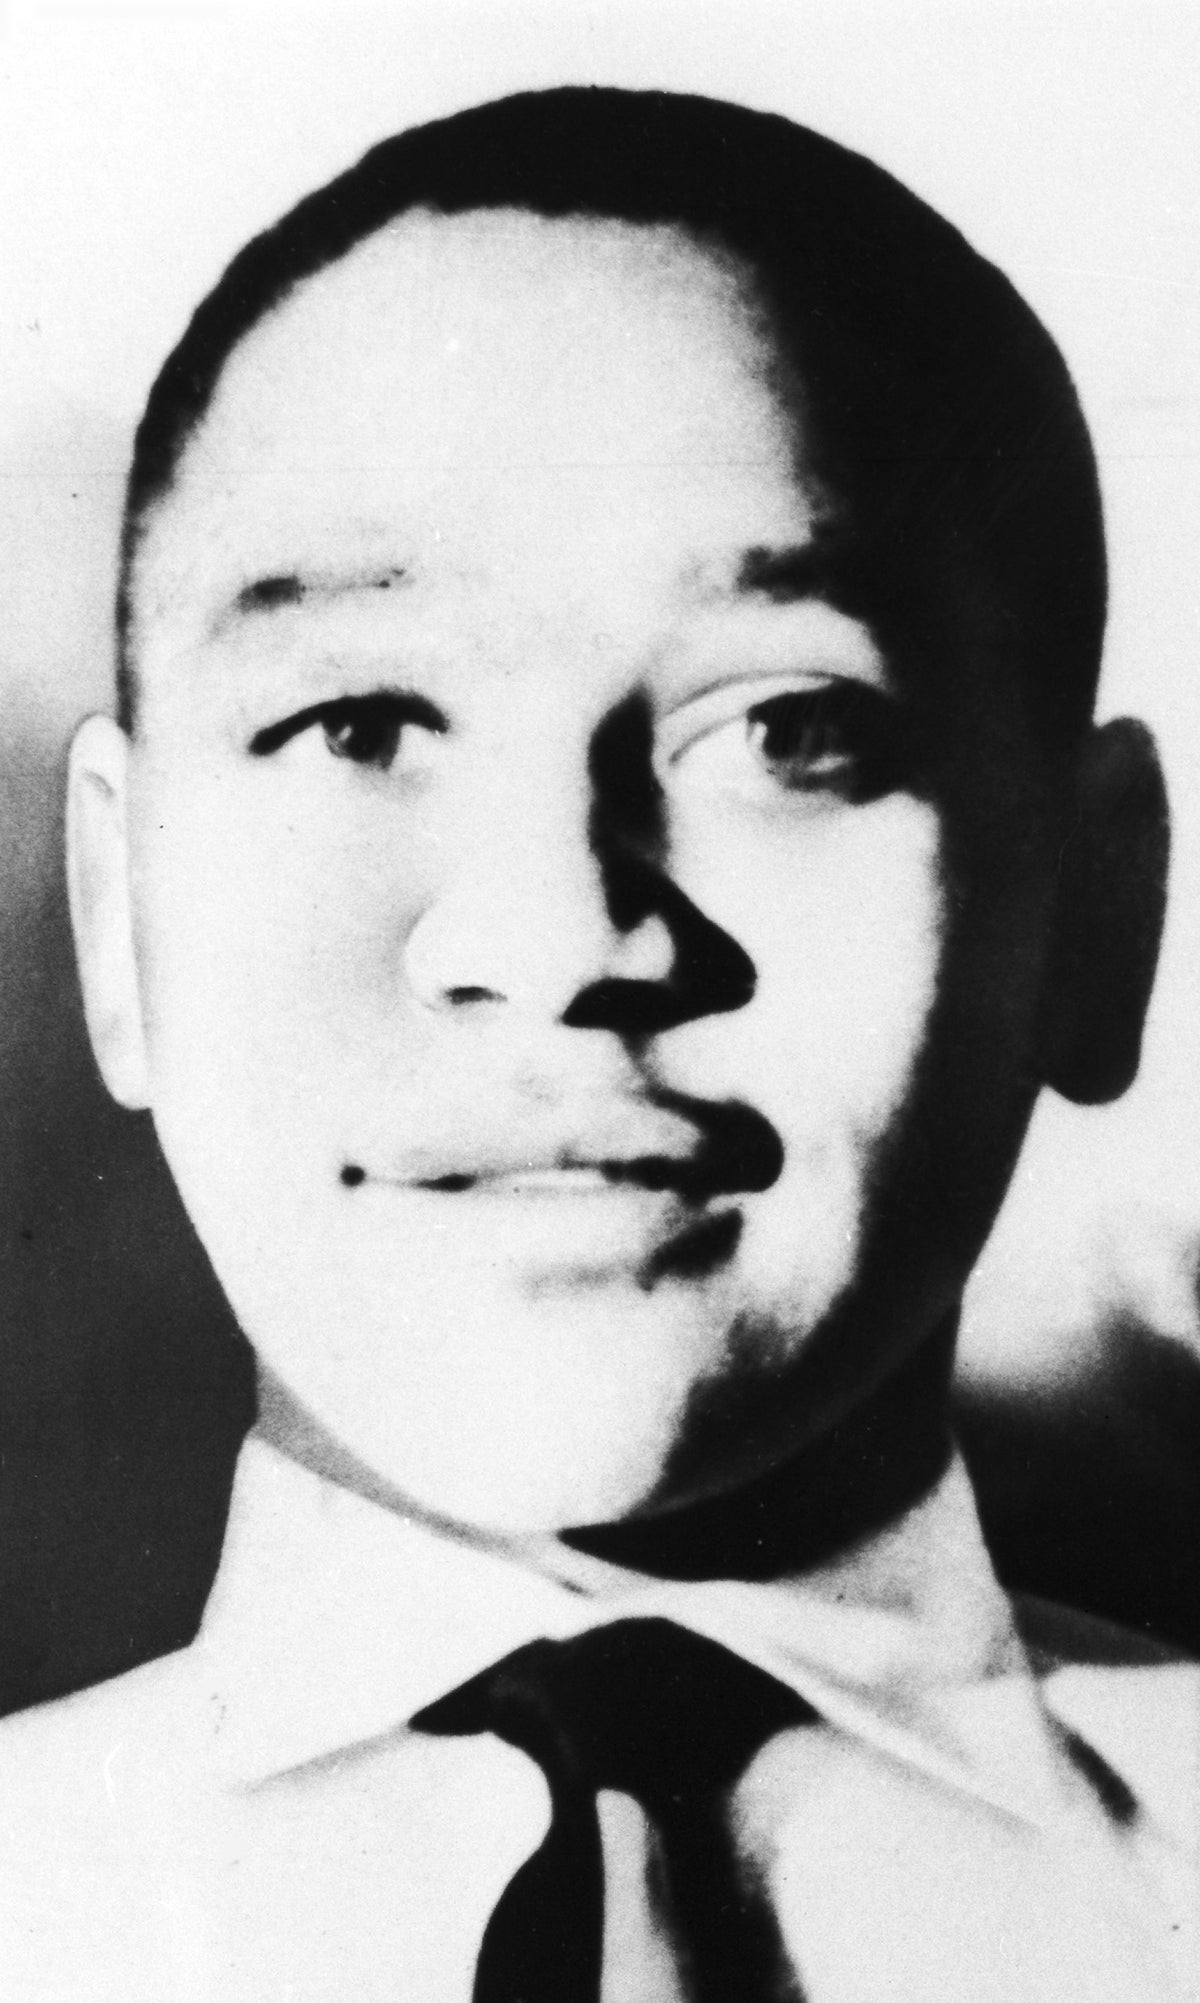 For Emmett Till’s family, national monument proclamation cements his inclusion in the American story